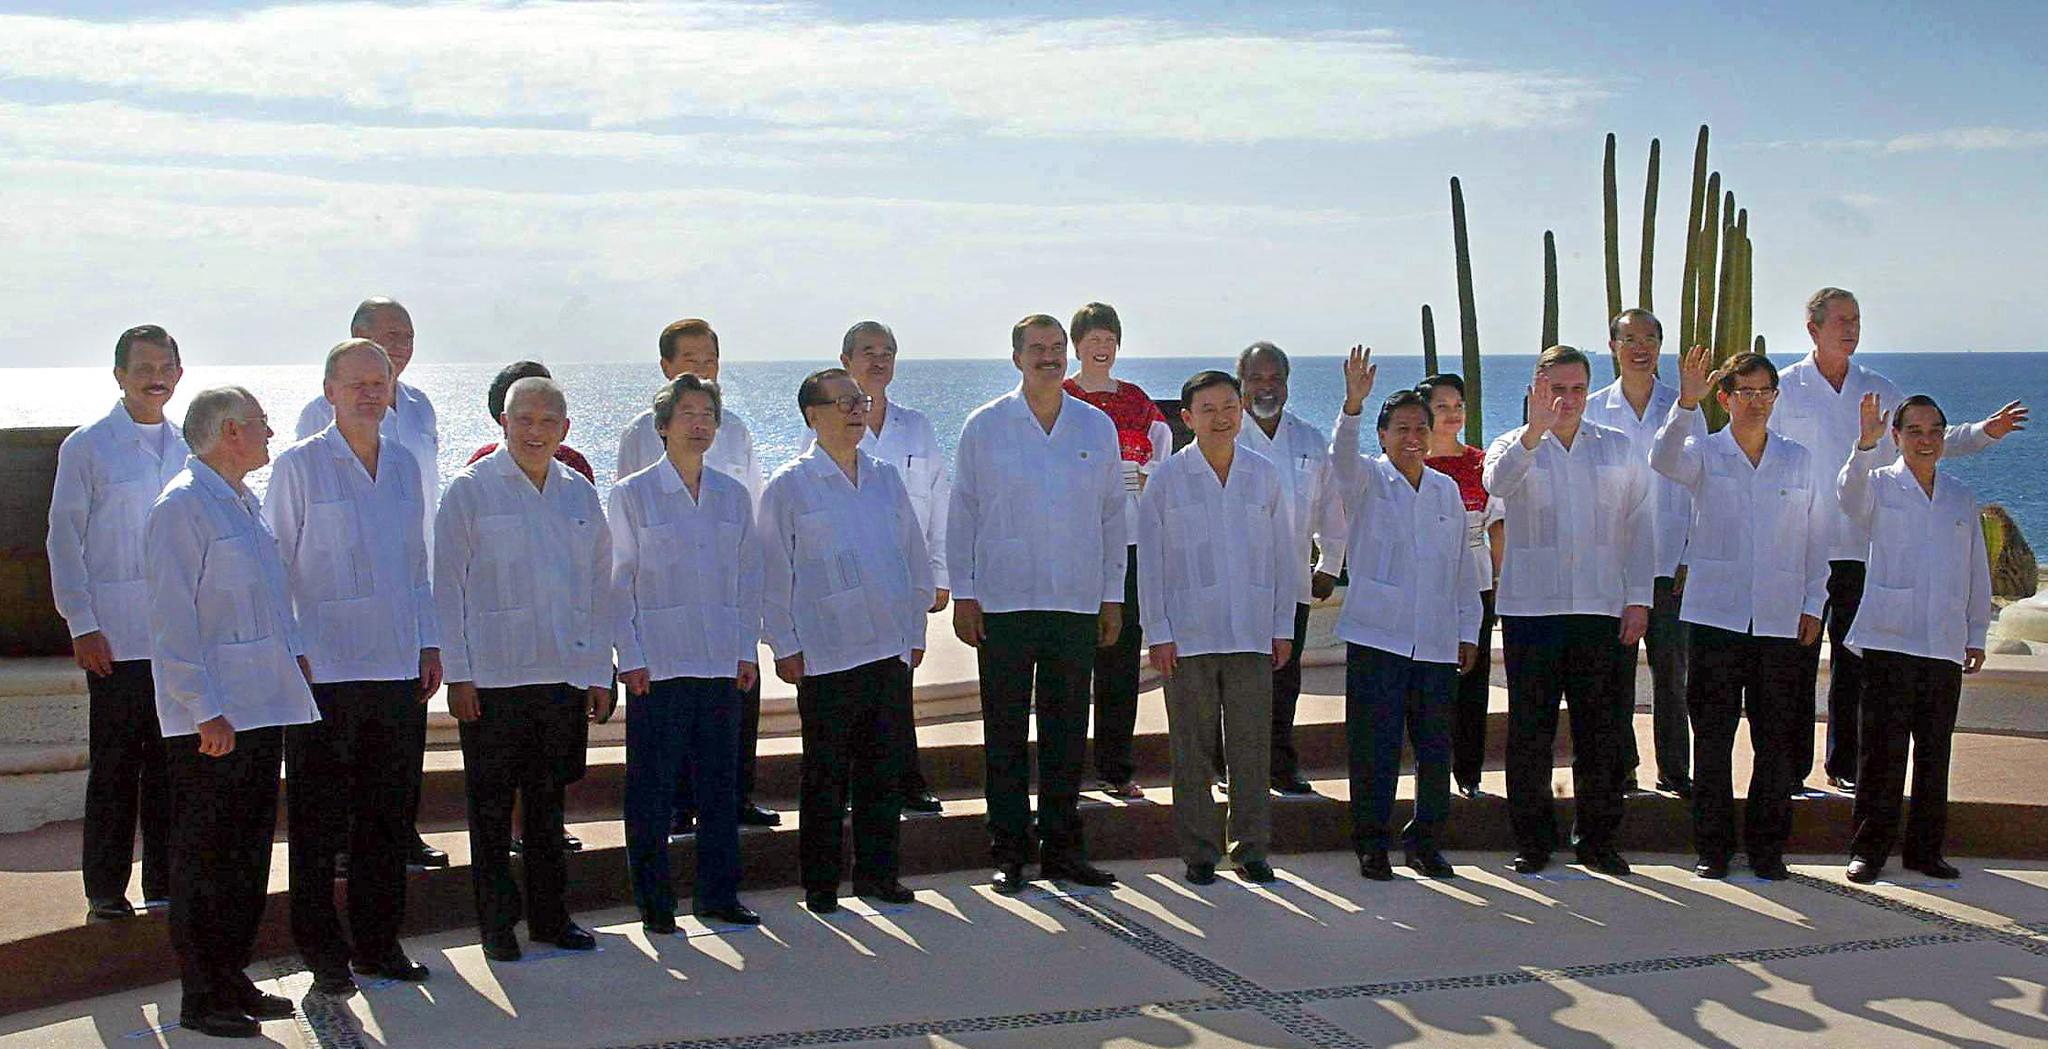 A group of world leaders are dressed in traditional Mexican attire for a portrait.